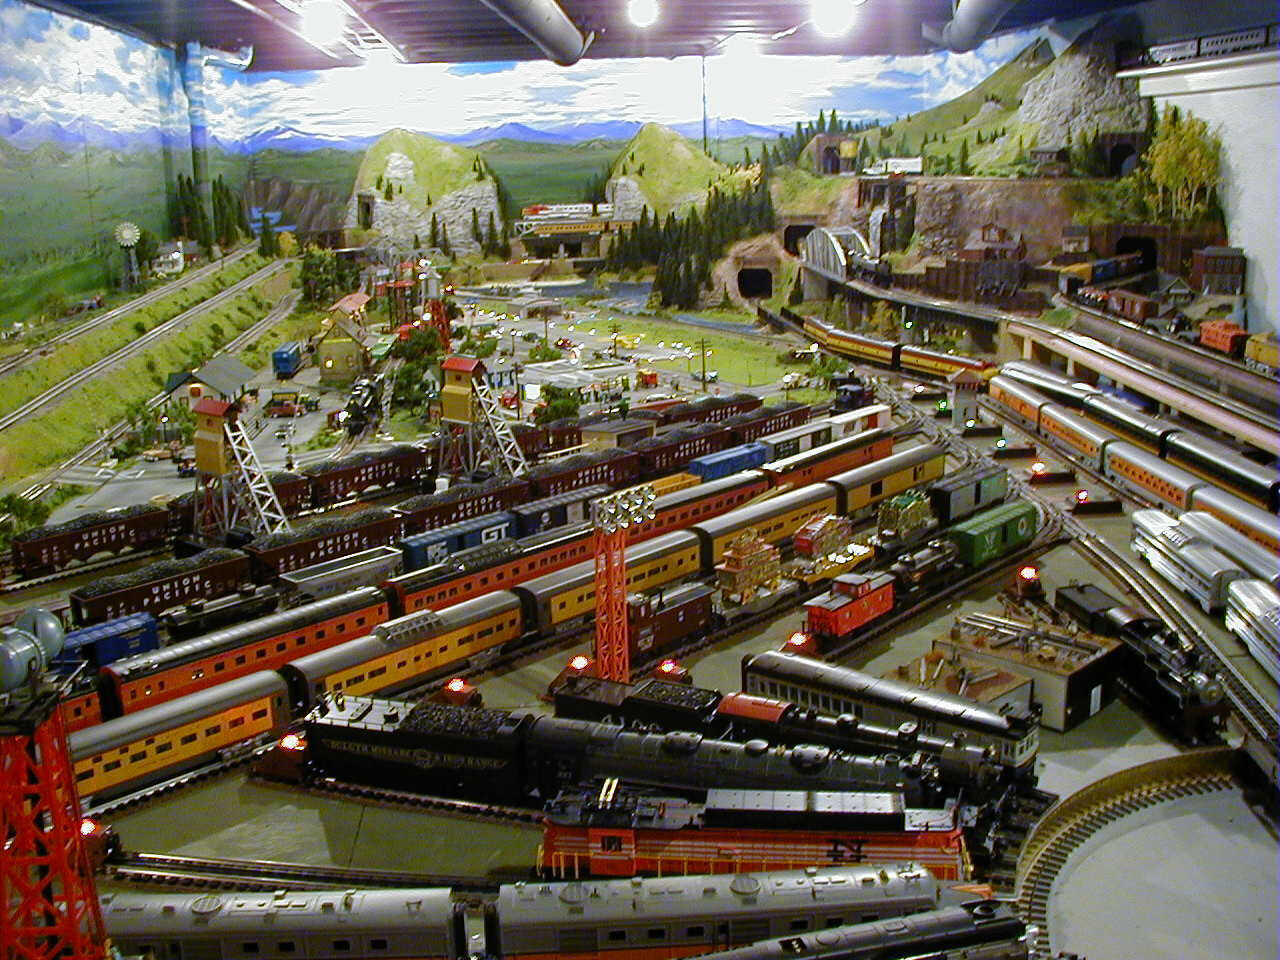  at all of the various trains on this awesome HO train layout. The